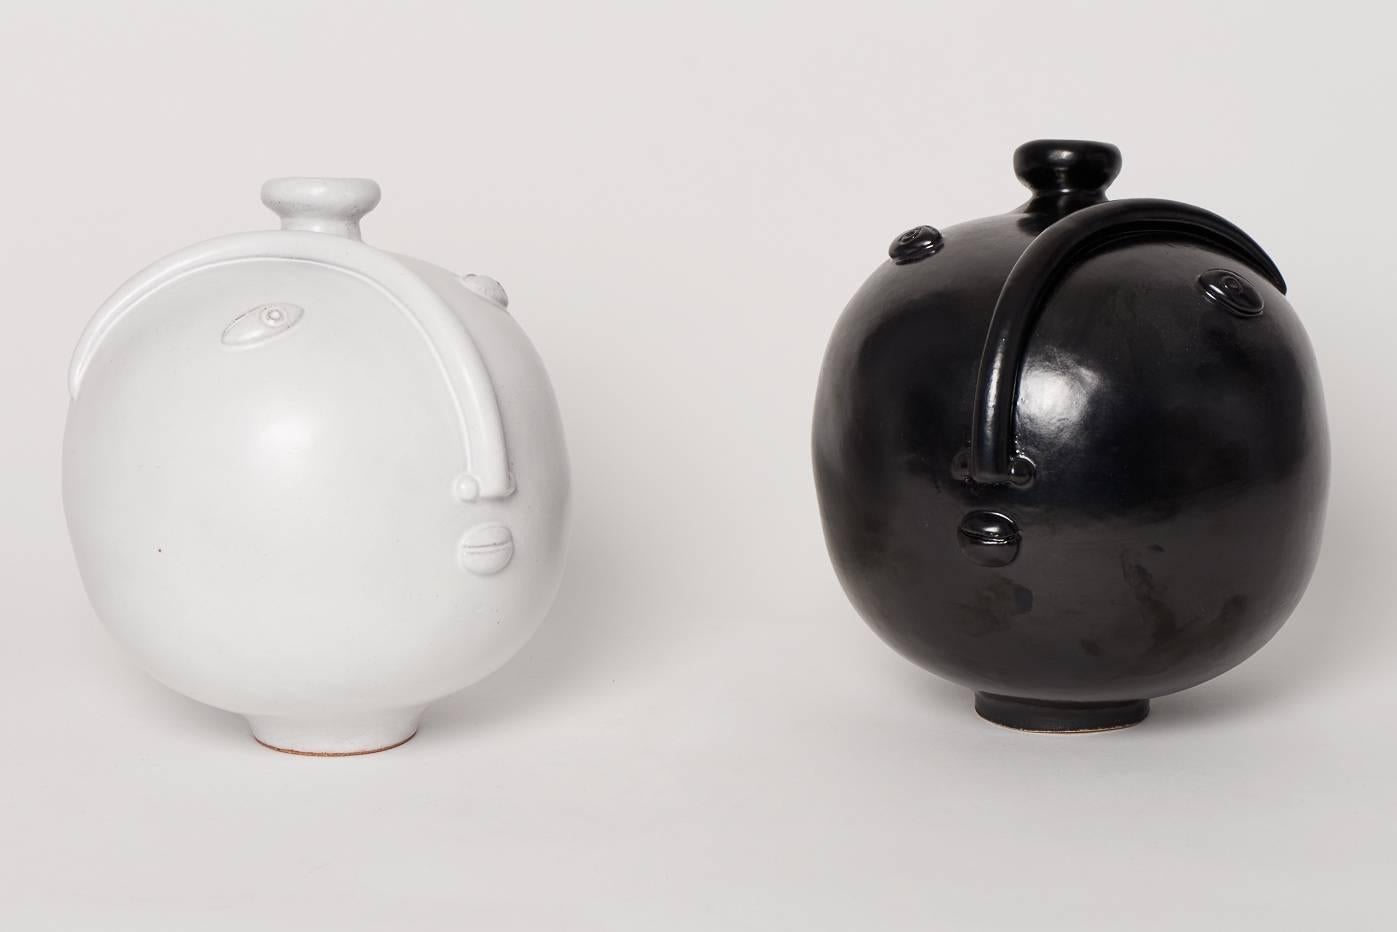 Pair of round decorative vases, one white gazed, one black glazed, signed by the French artists Dalo.
Unique pieces, 2016.